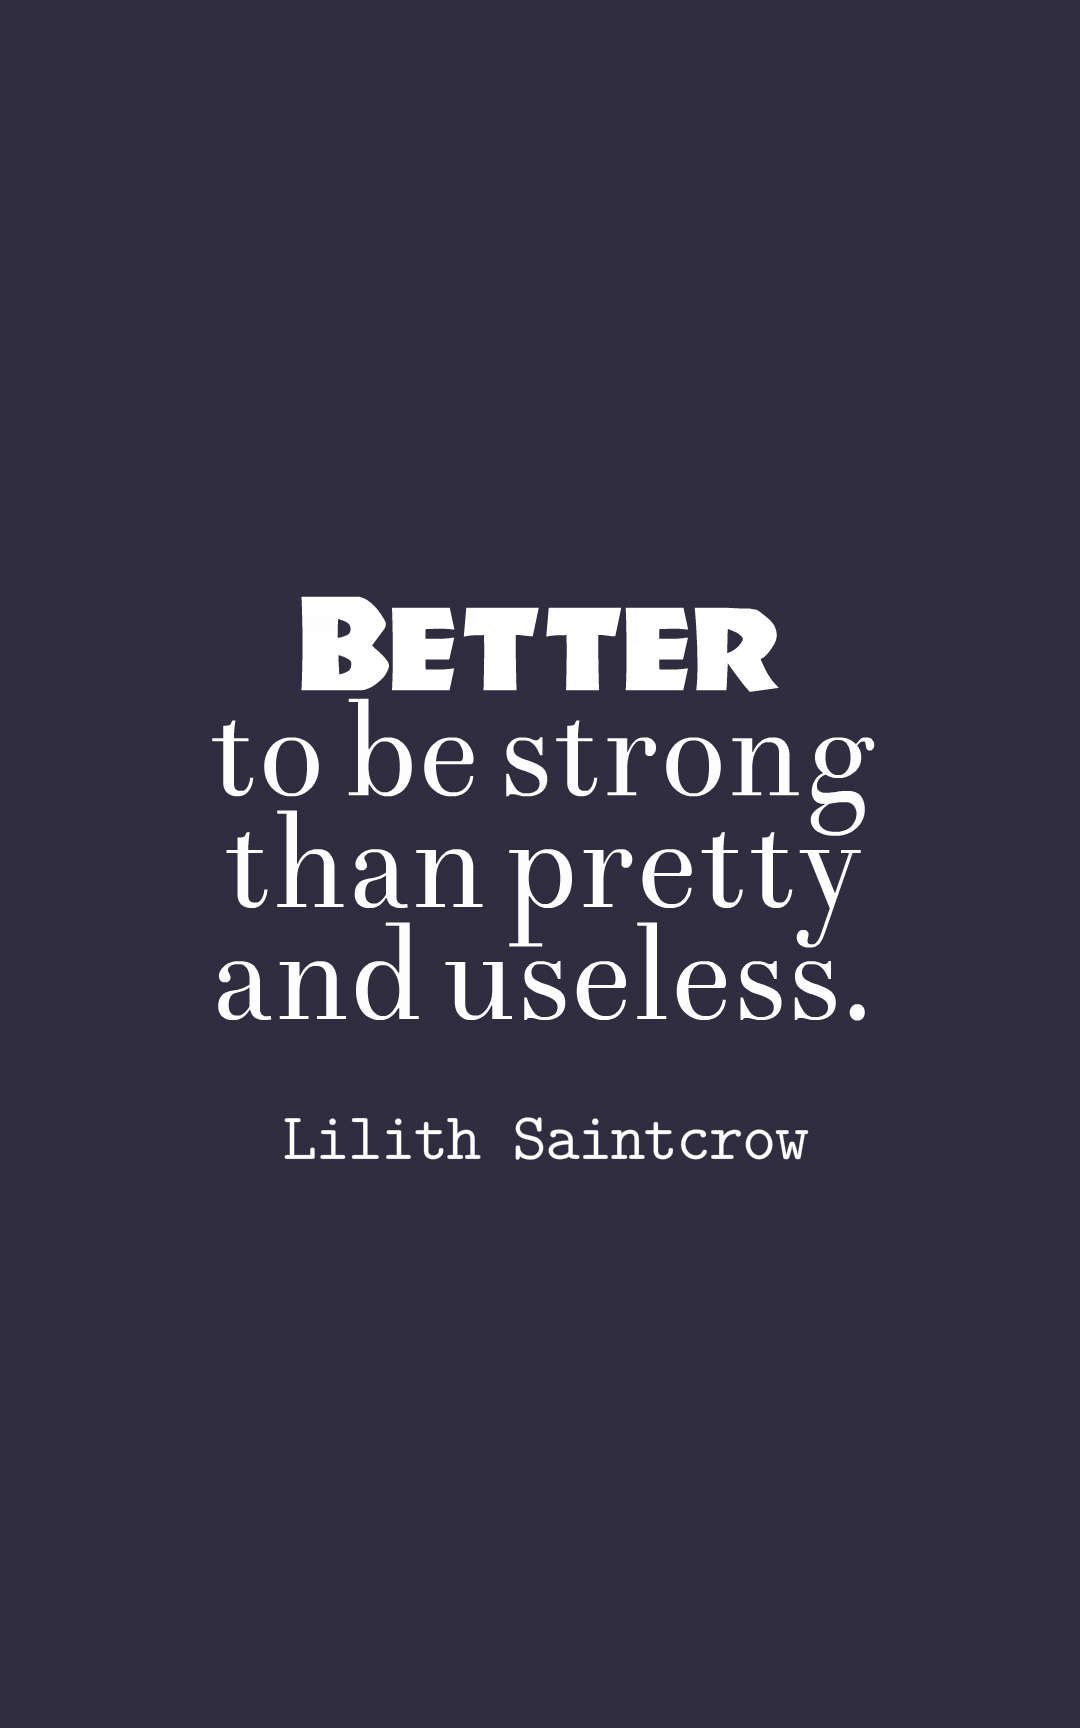 Better to be strong than pretty and useless.